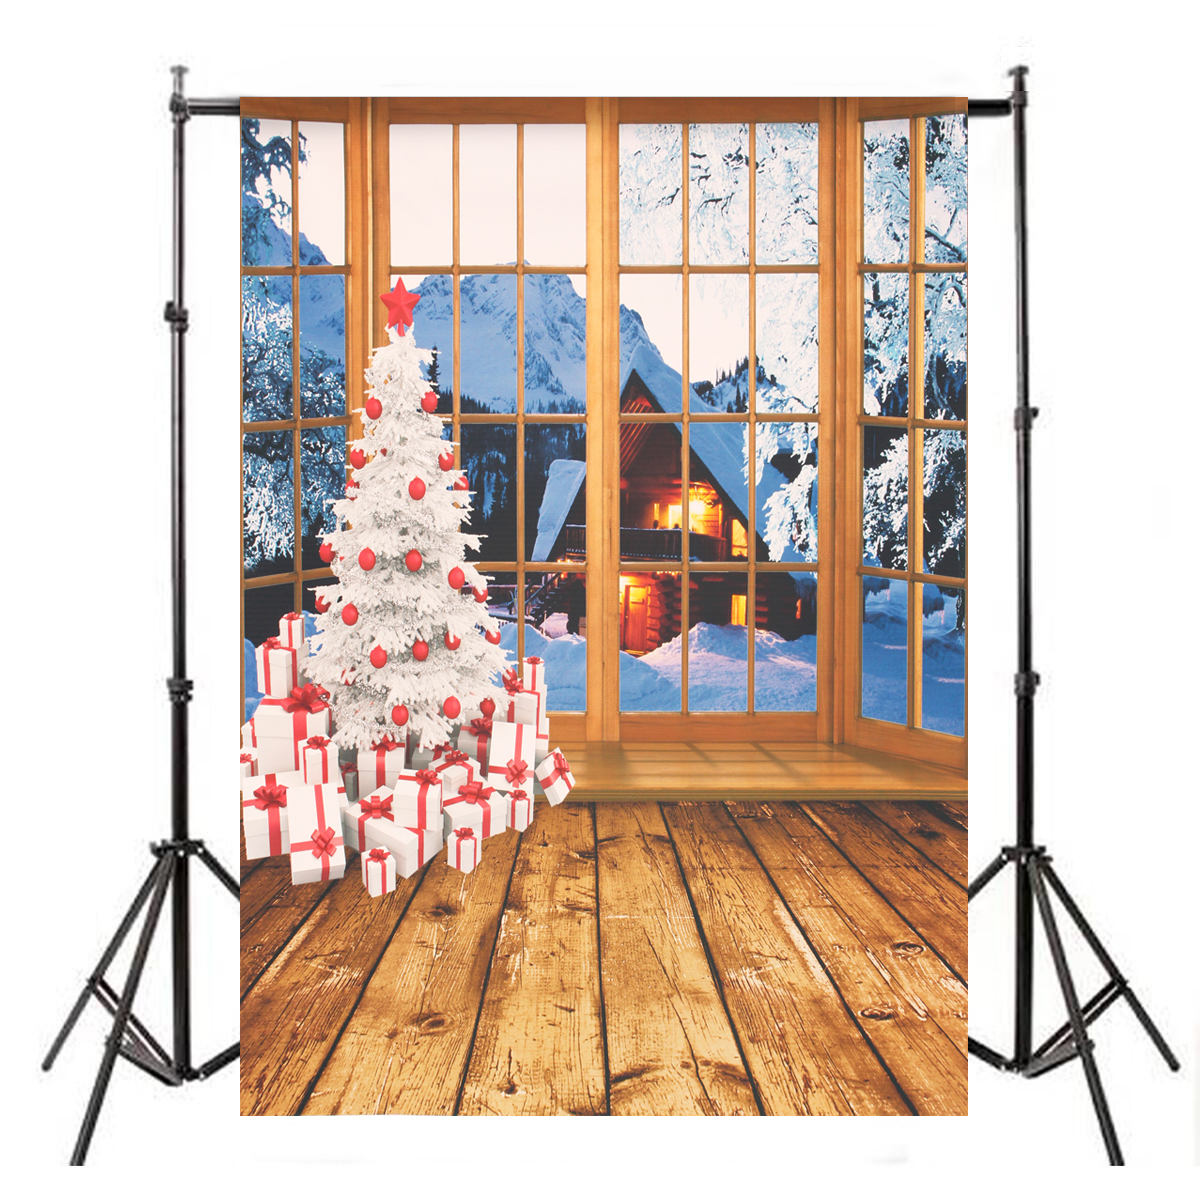 Mohoo-5x7ft-15x21m-Christmas-Backdrop-Photo-Window-Backdrop-with-Wooden-Floor-Christmas-Tree-Snow-Co-1958159-6